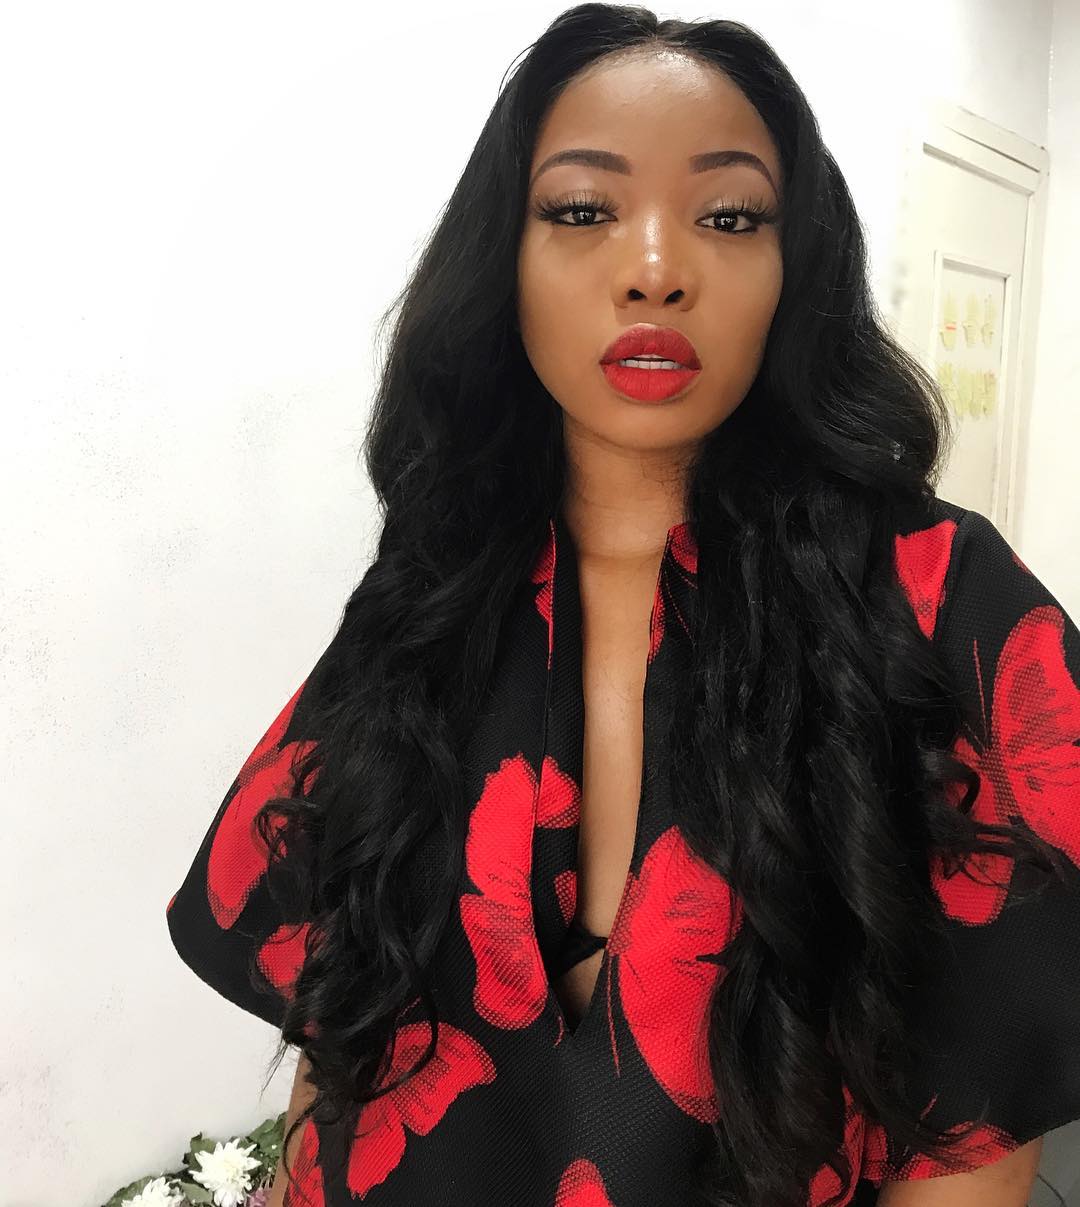 Nigerian Rapper, Mo'Cheddah Celebrates Her 27th Birthday Today